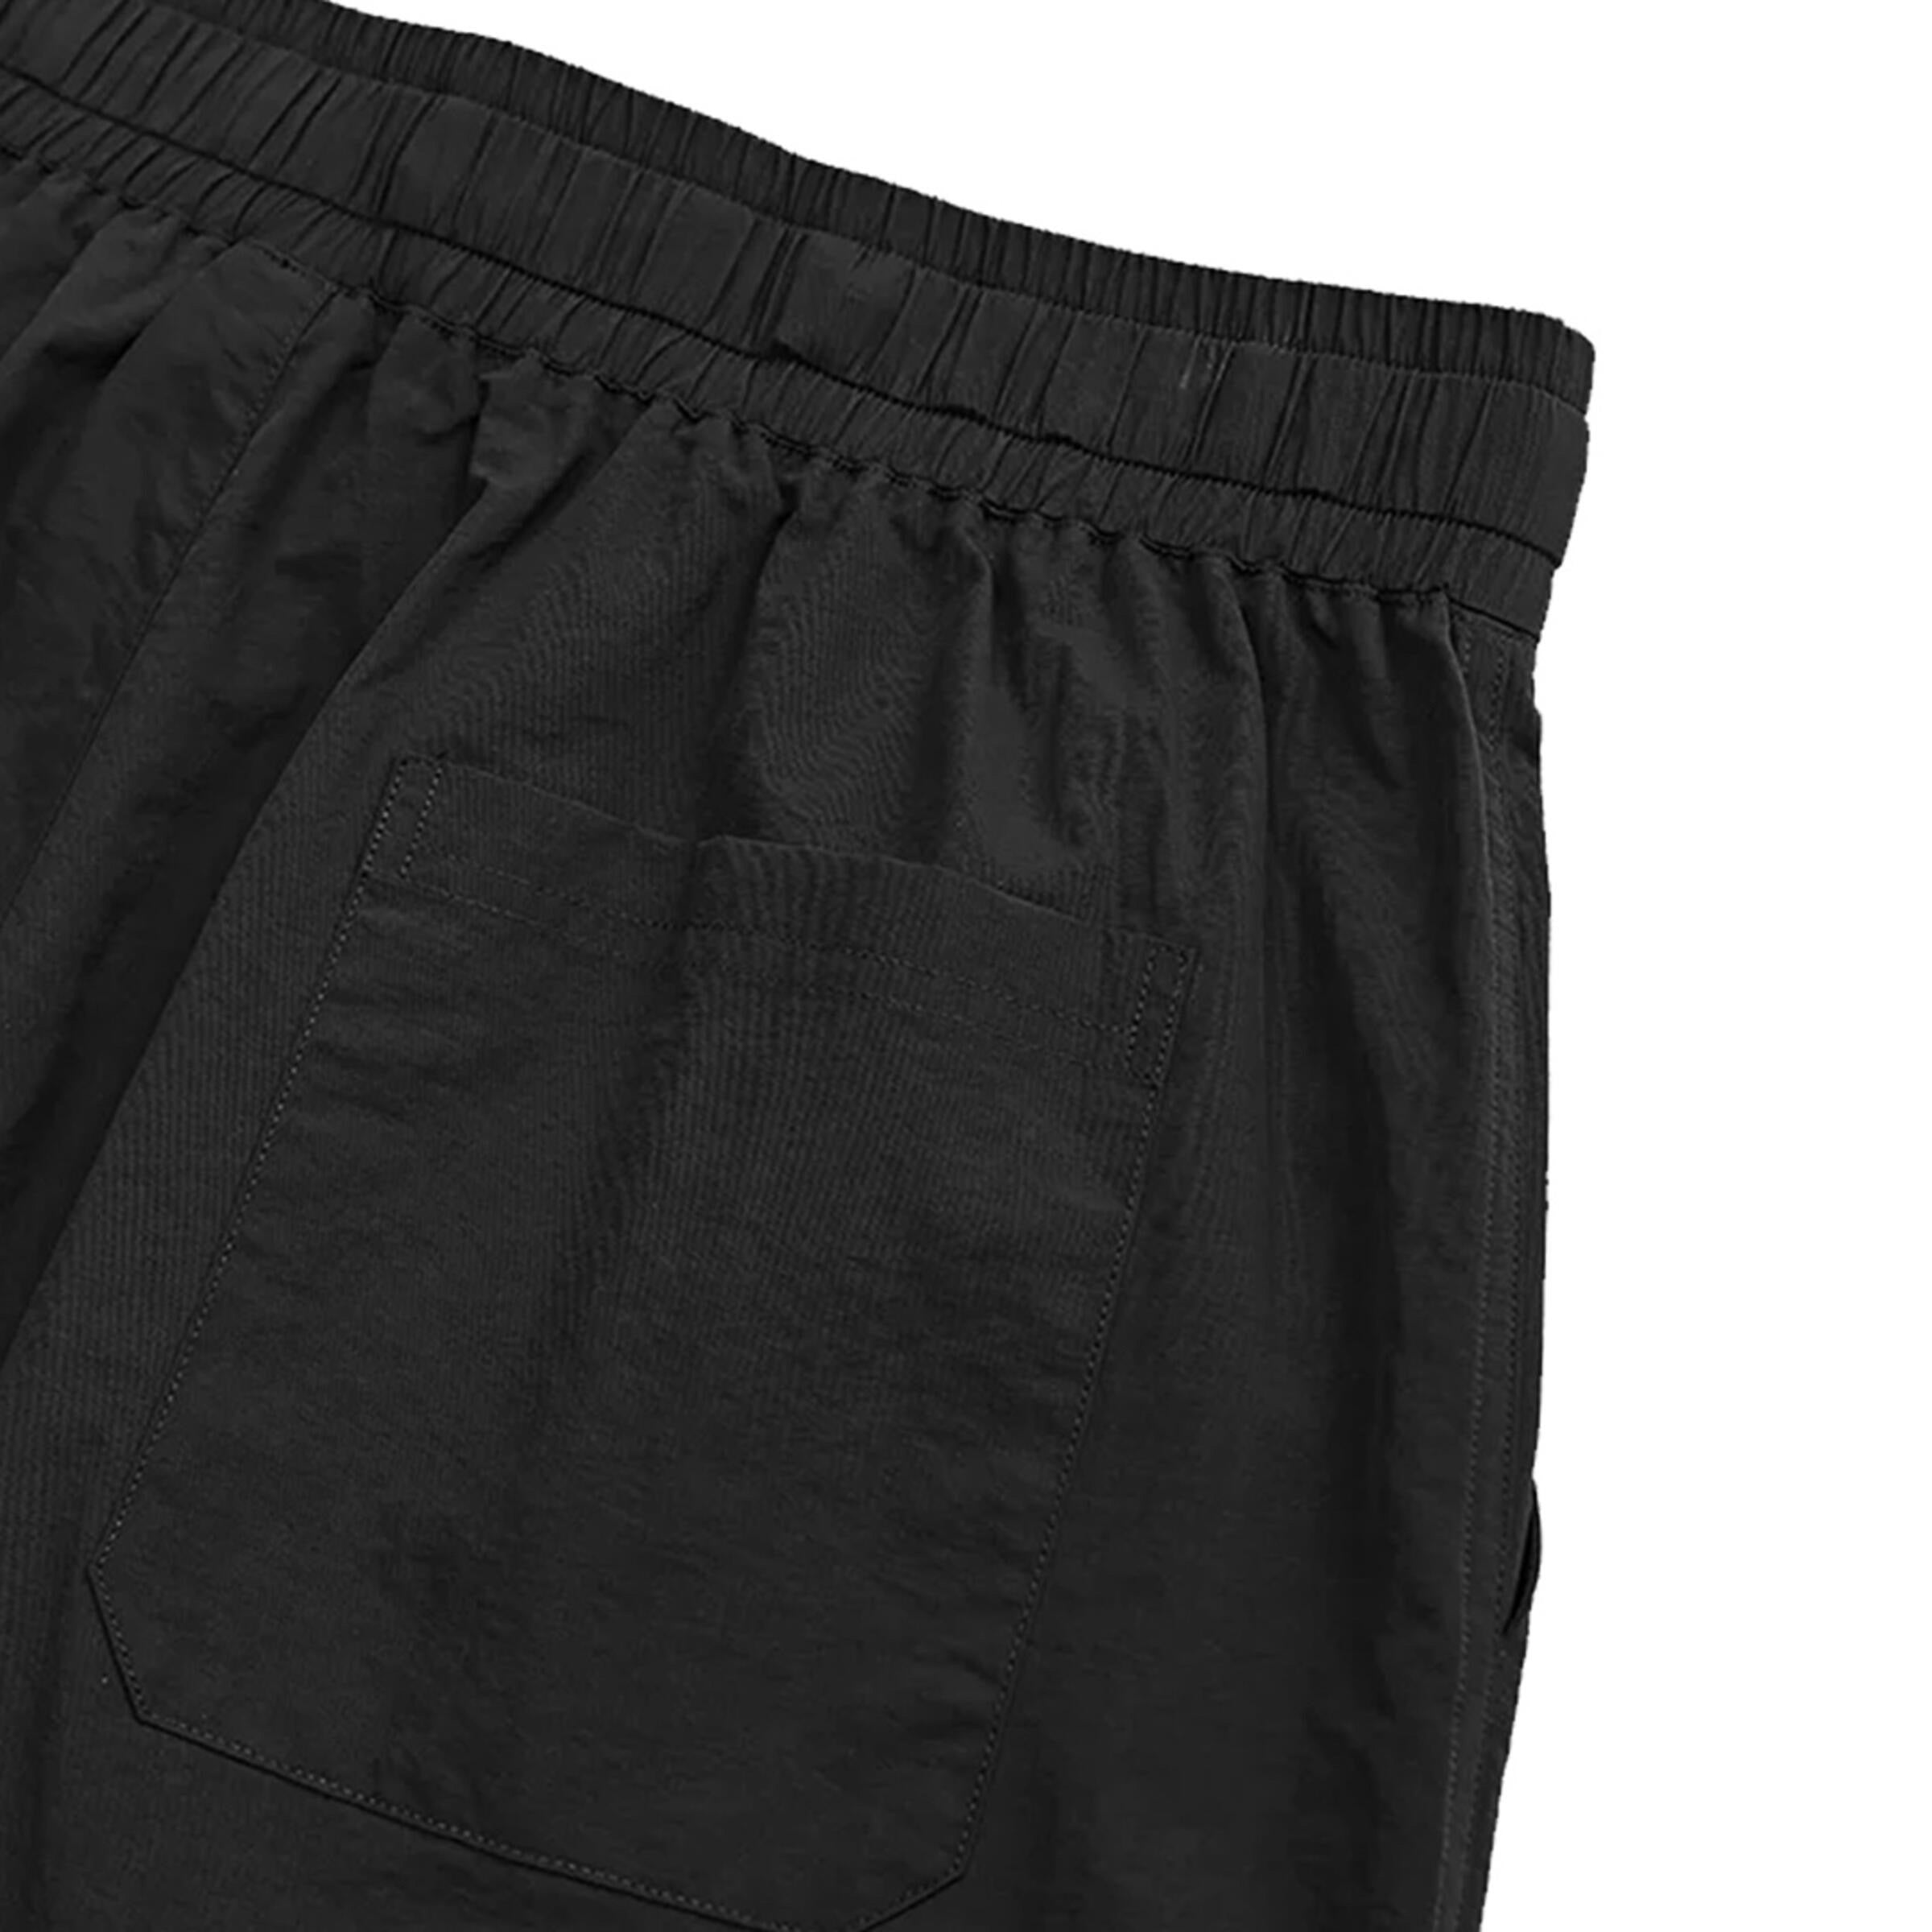 It Means Good Bueno Hiking Shorts - Black